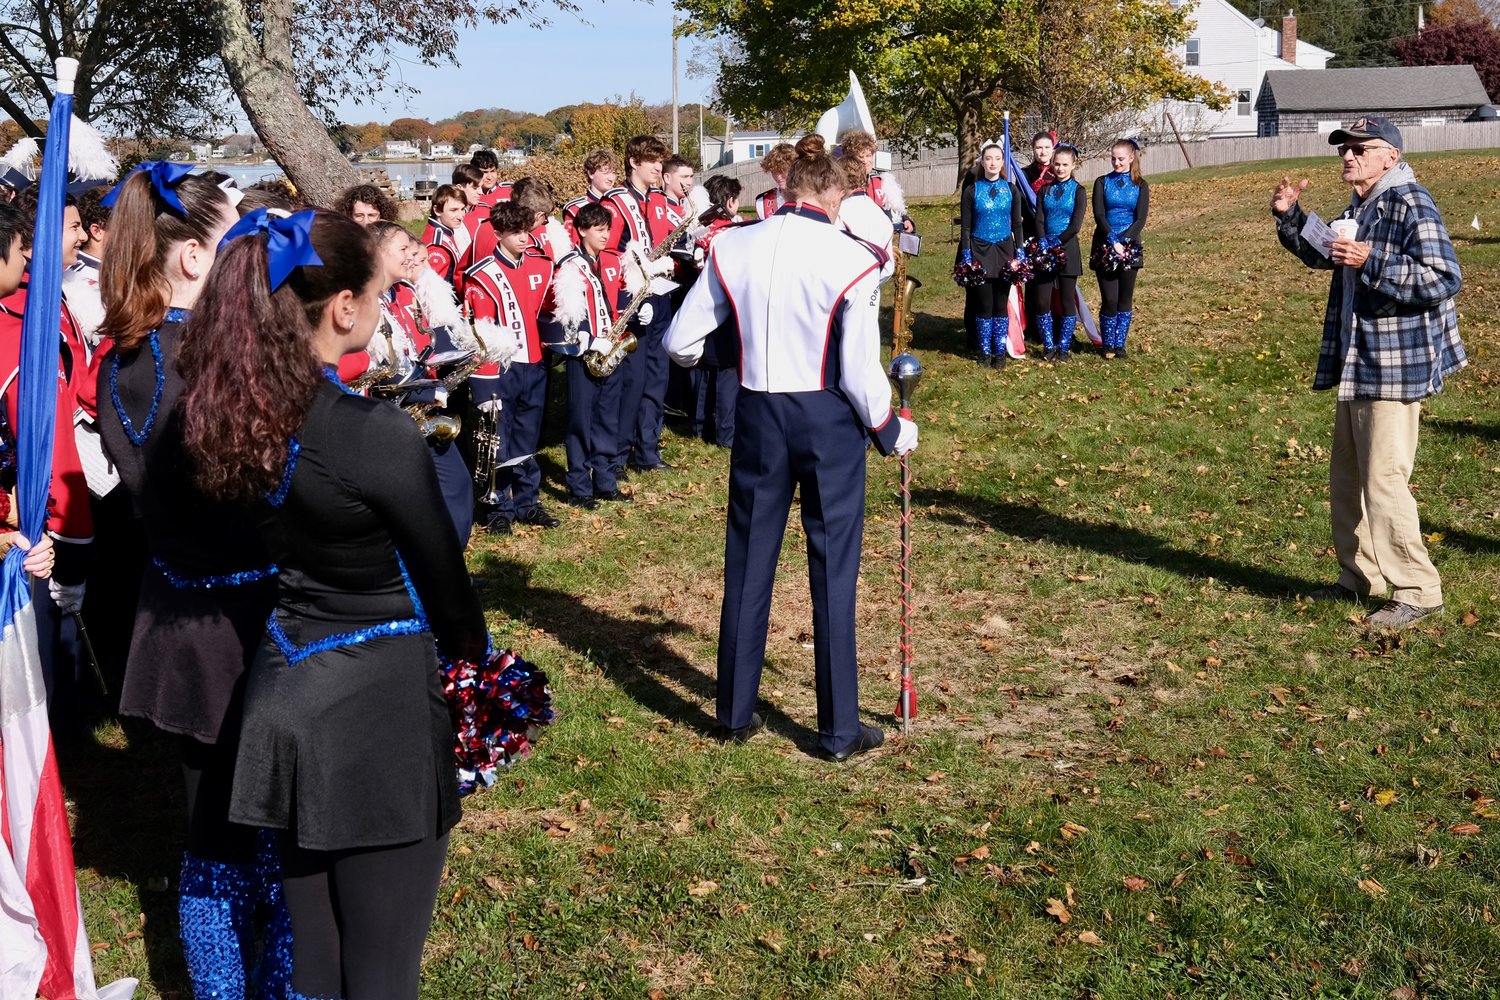 George Cushing (right) thanks PHS Band members after their performance.